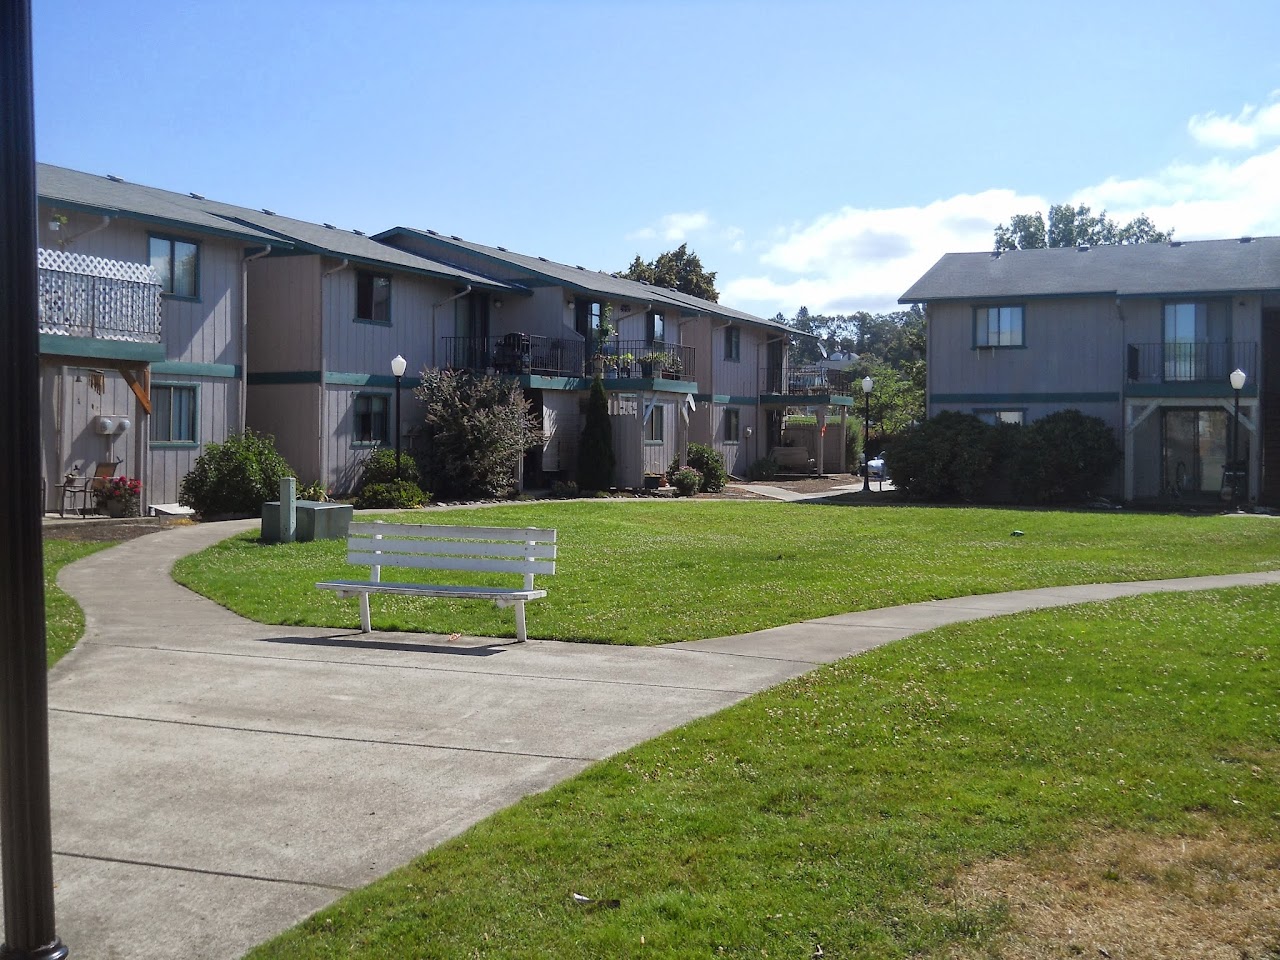 Photo of TWO RIVERS WINSTON. Affordable housing located at 189 NW GLENHART AVENUE WINSTON, OR 97496